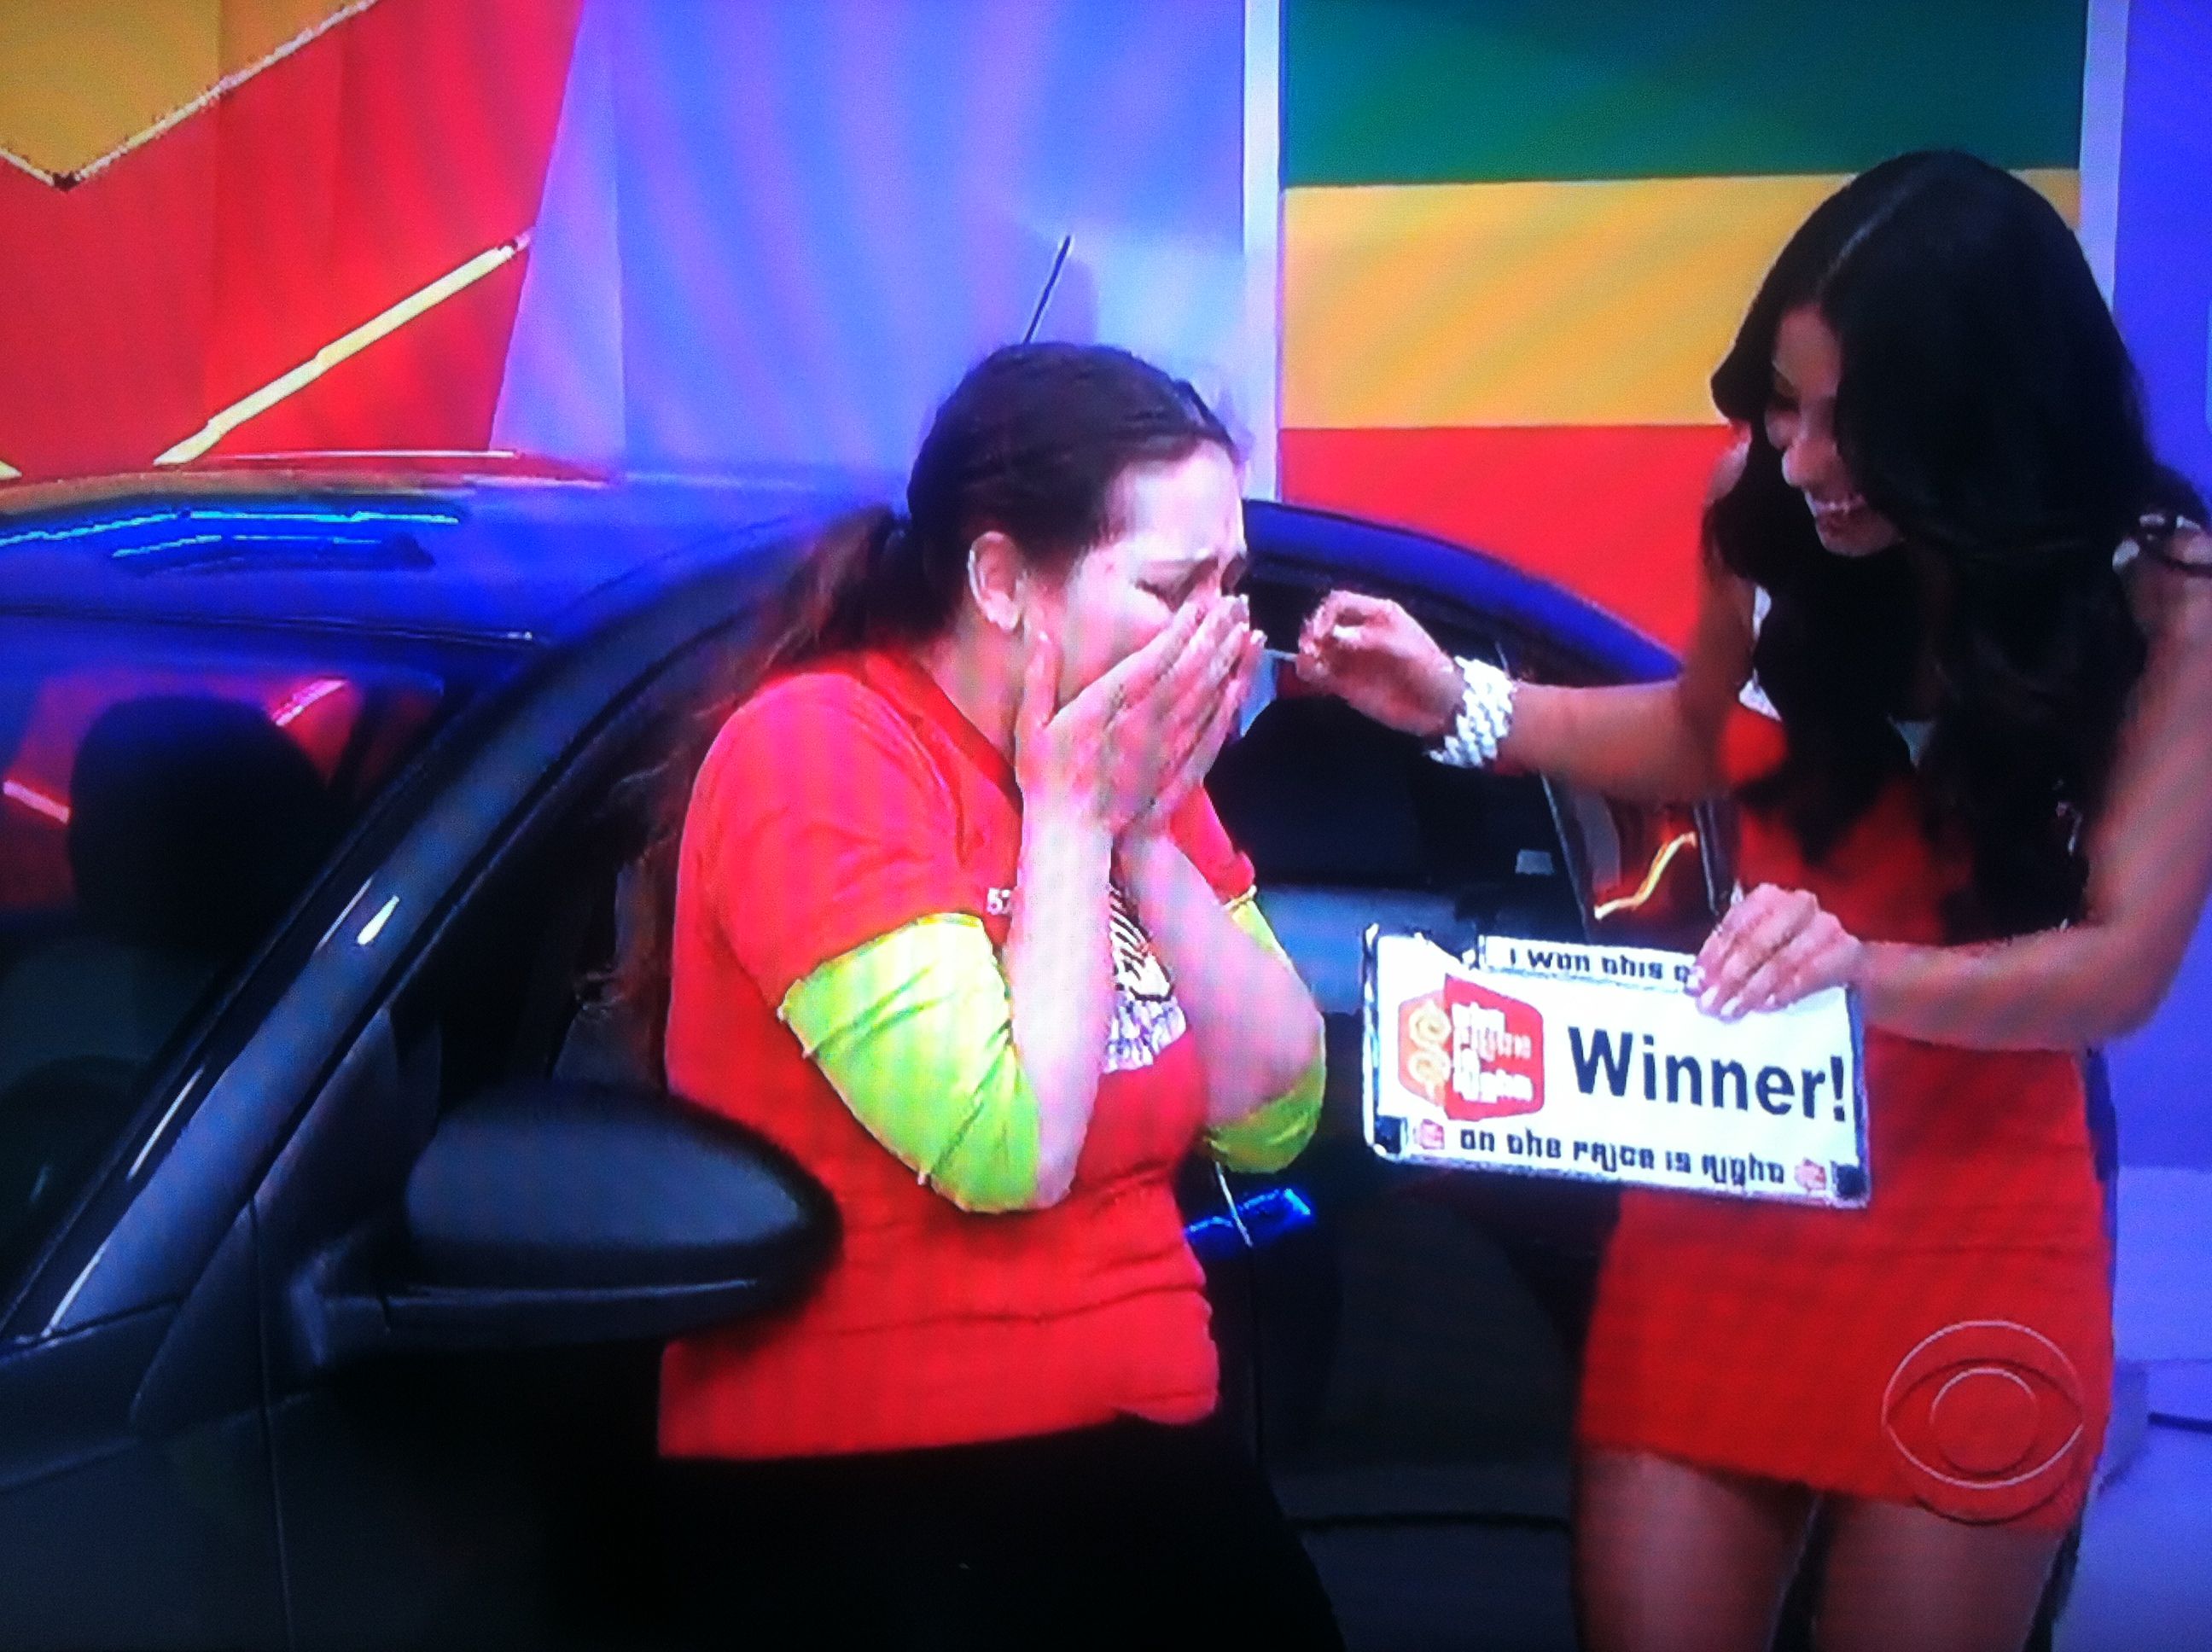 Aurora De Lucia nearing tears after she won a brand new car on The Price is Right